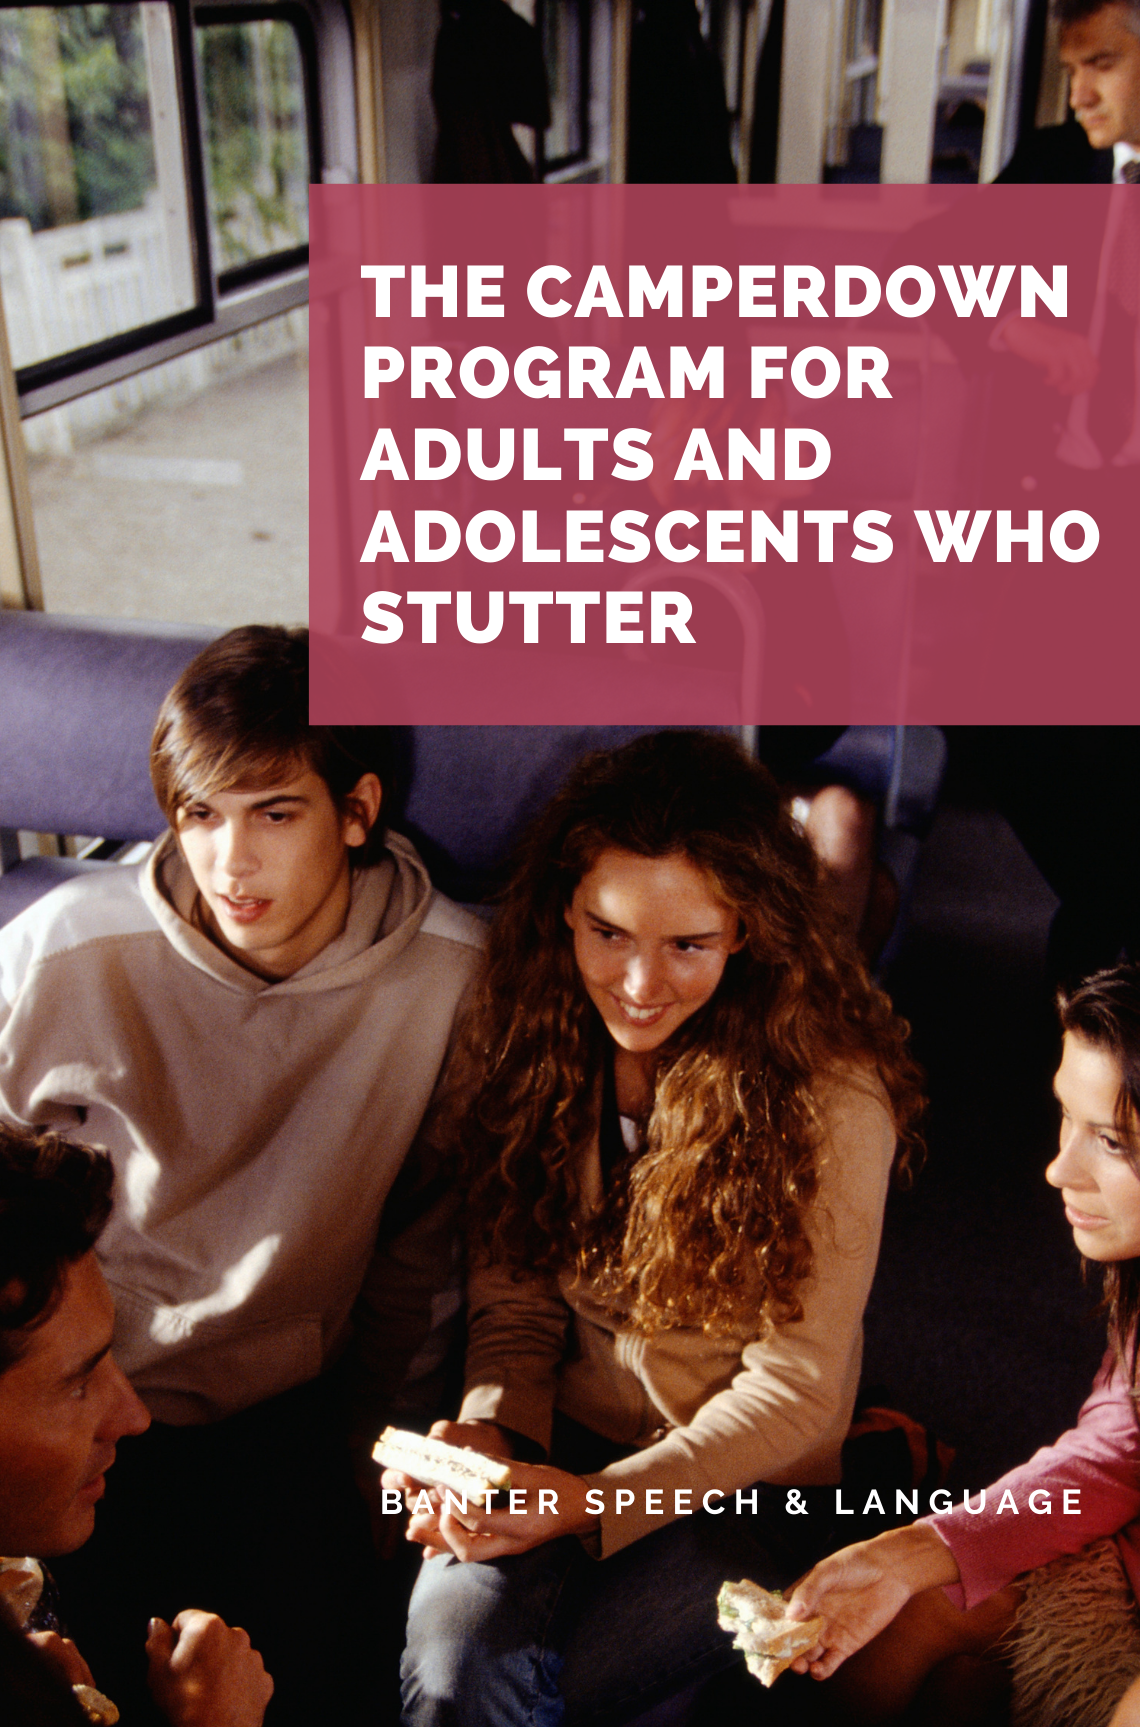 The Camperdown Program for adults and adolescents who stutter